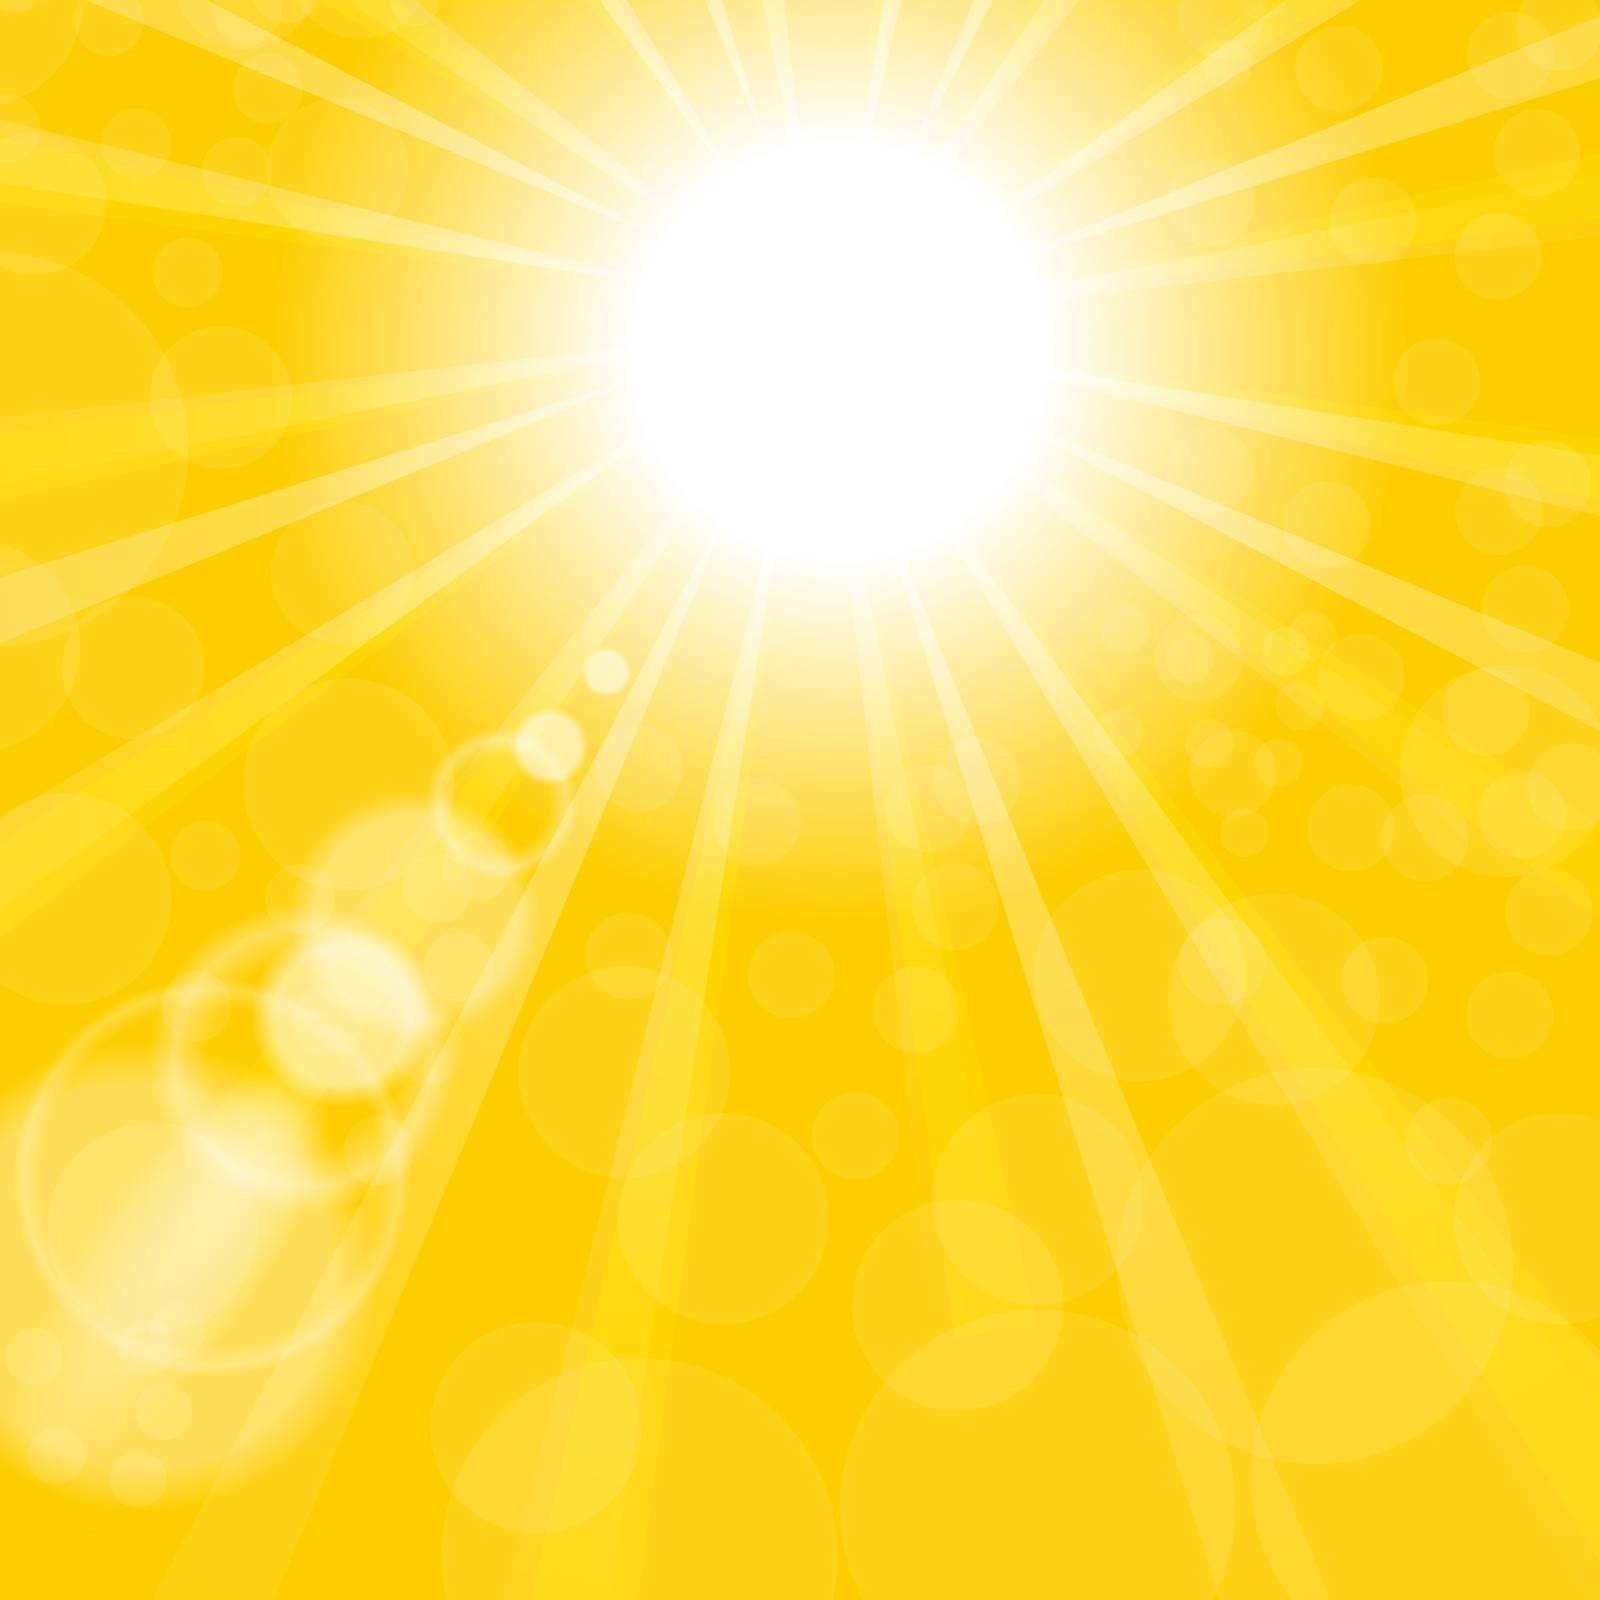 Abstract Sun Background. Yellow Summer Pattern by valeo5